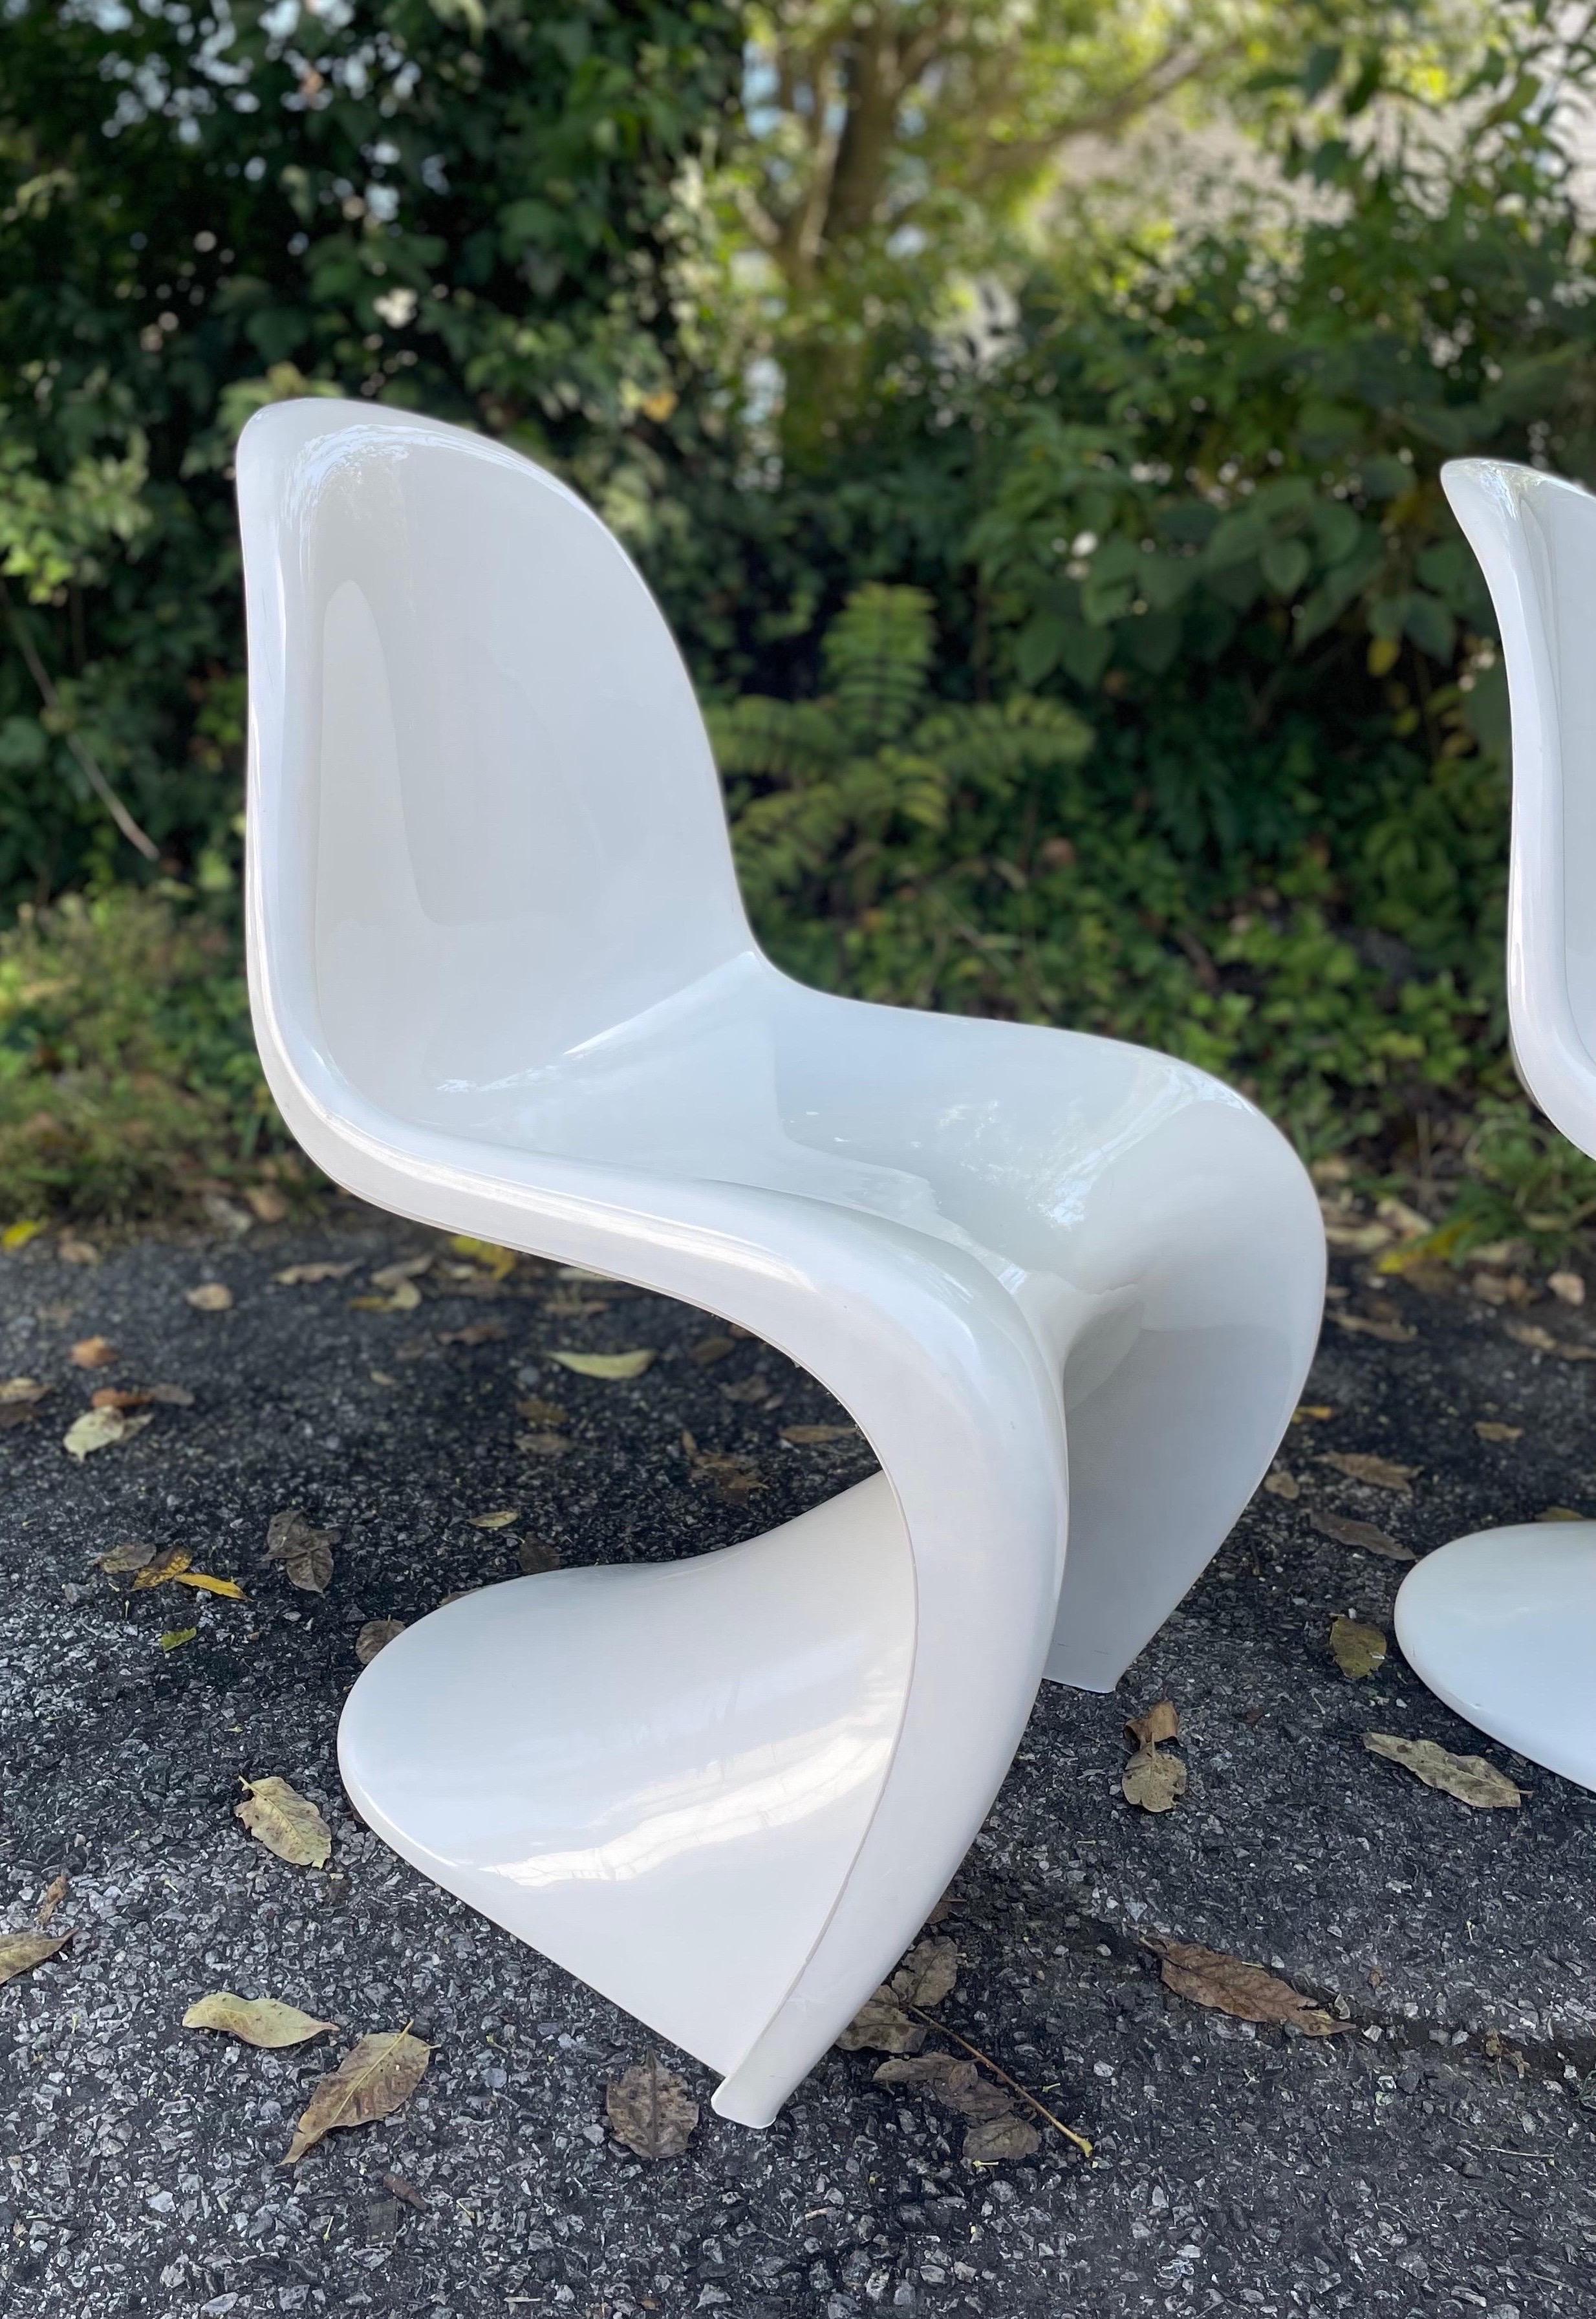 A pair of iconic Verner Panton S-chairs made in 1976. European production (Fehlbaum/Vitra) third series model made of thermoplastic Polysterol (Luran S). The chairs made of this material can be identified by the ribs below the kink between the seat